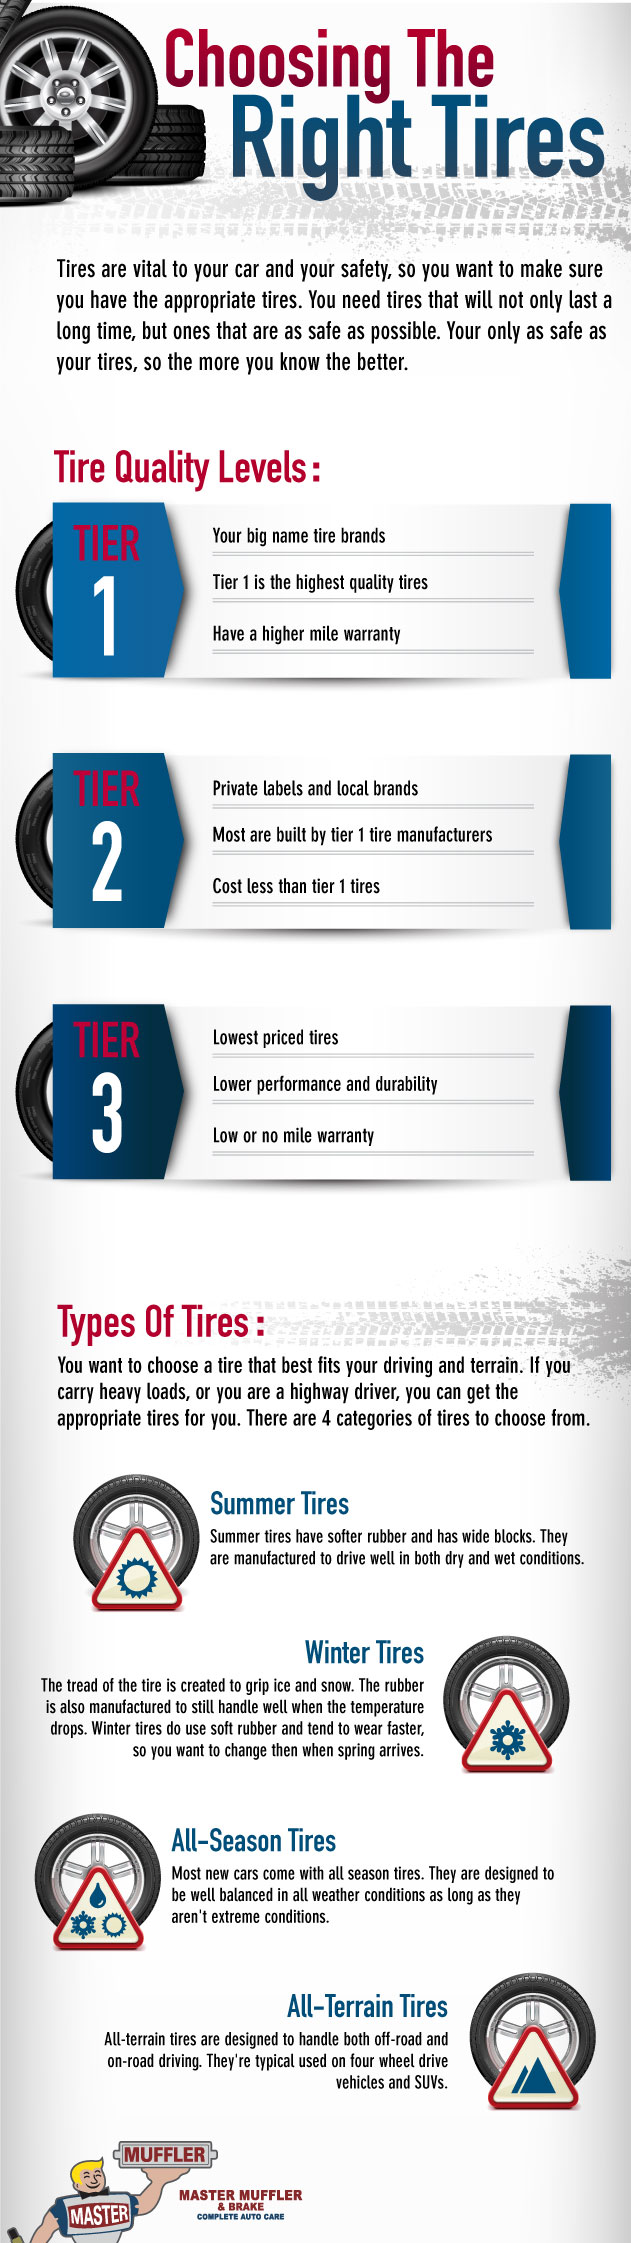 Infographic about choosing the right tires